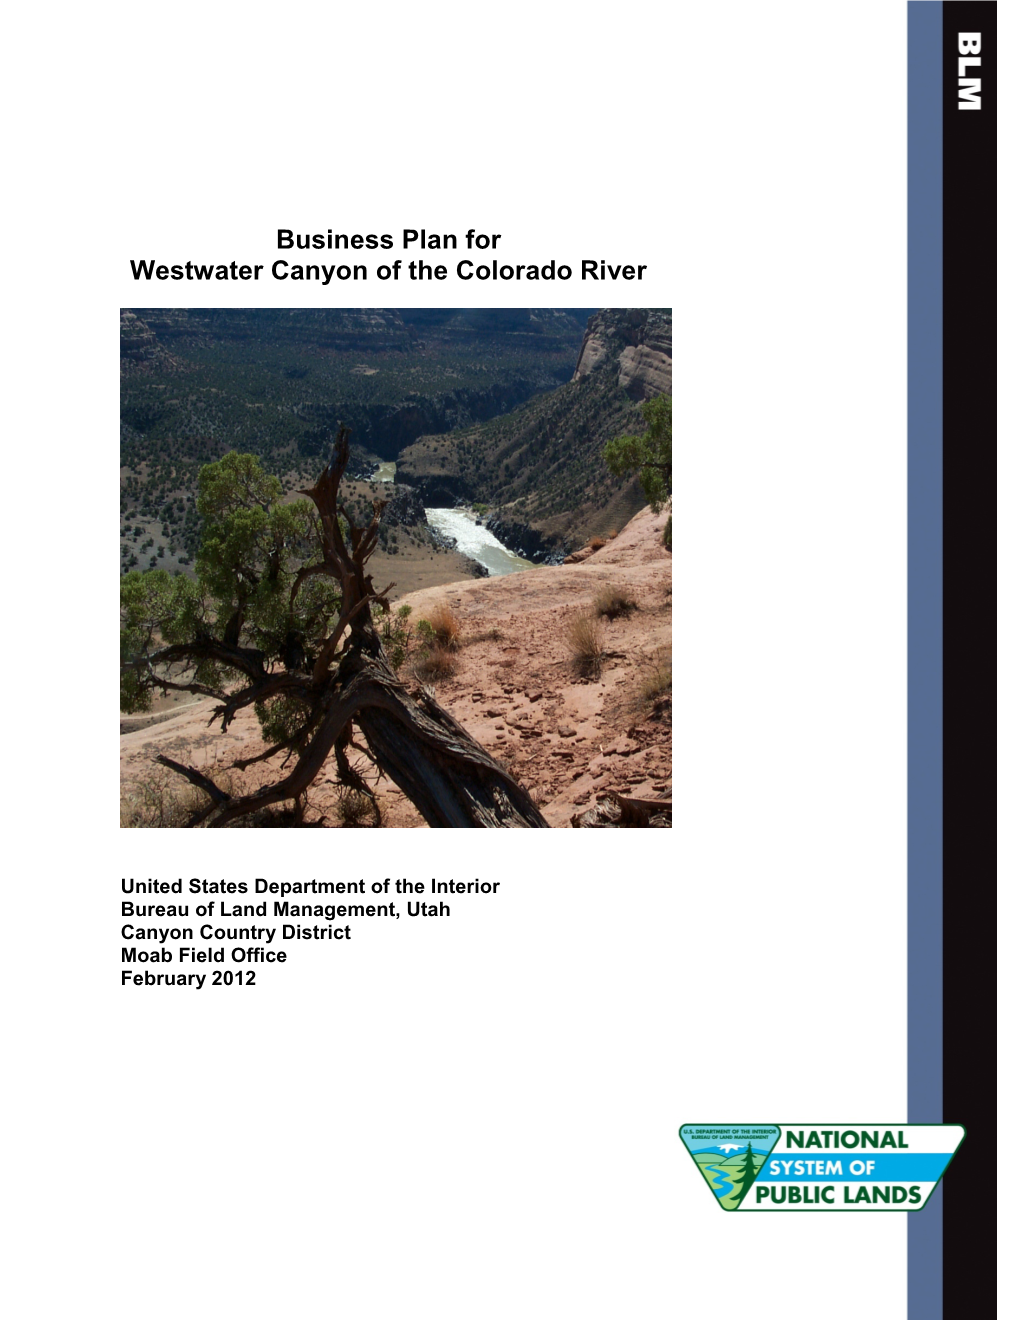 Business Plan for Westwater Canyon of the Colorado River